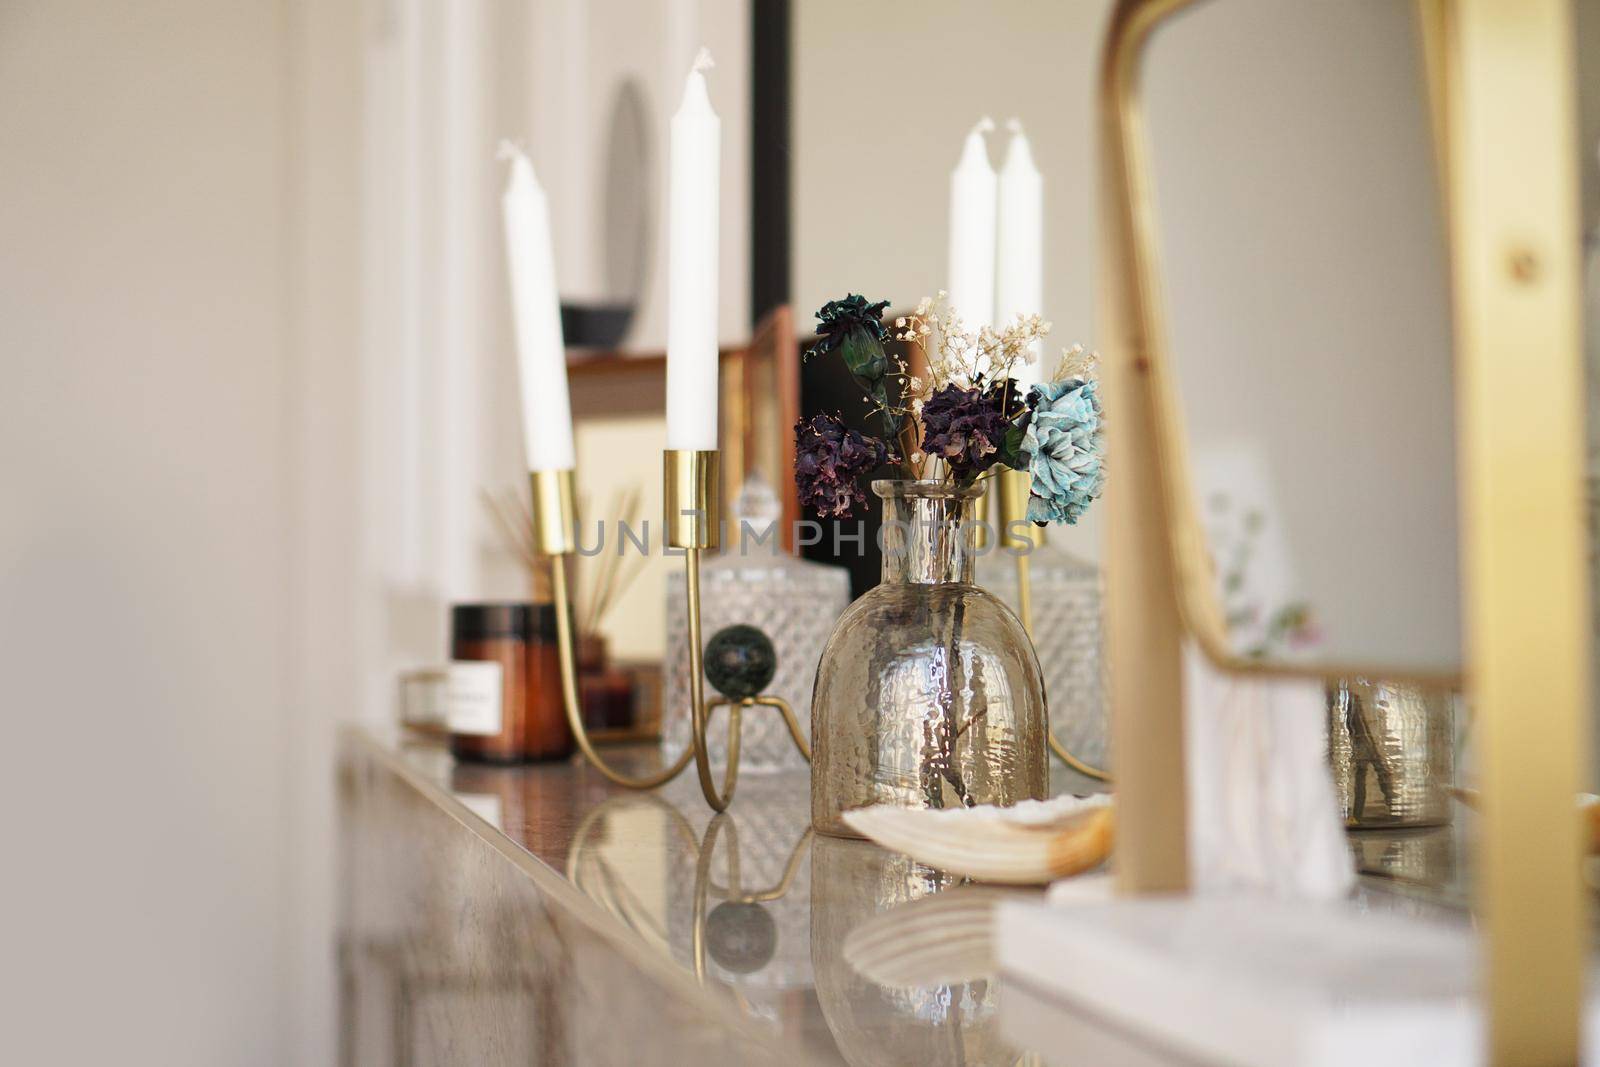 Home interior decor. Glass jar with dried flowers, vase and candle. Living room decoration.